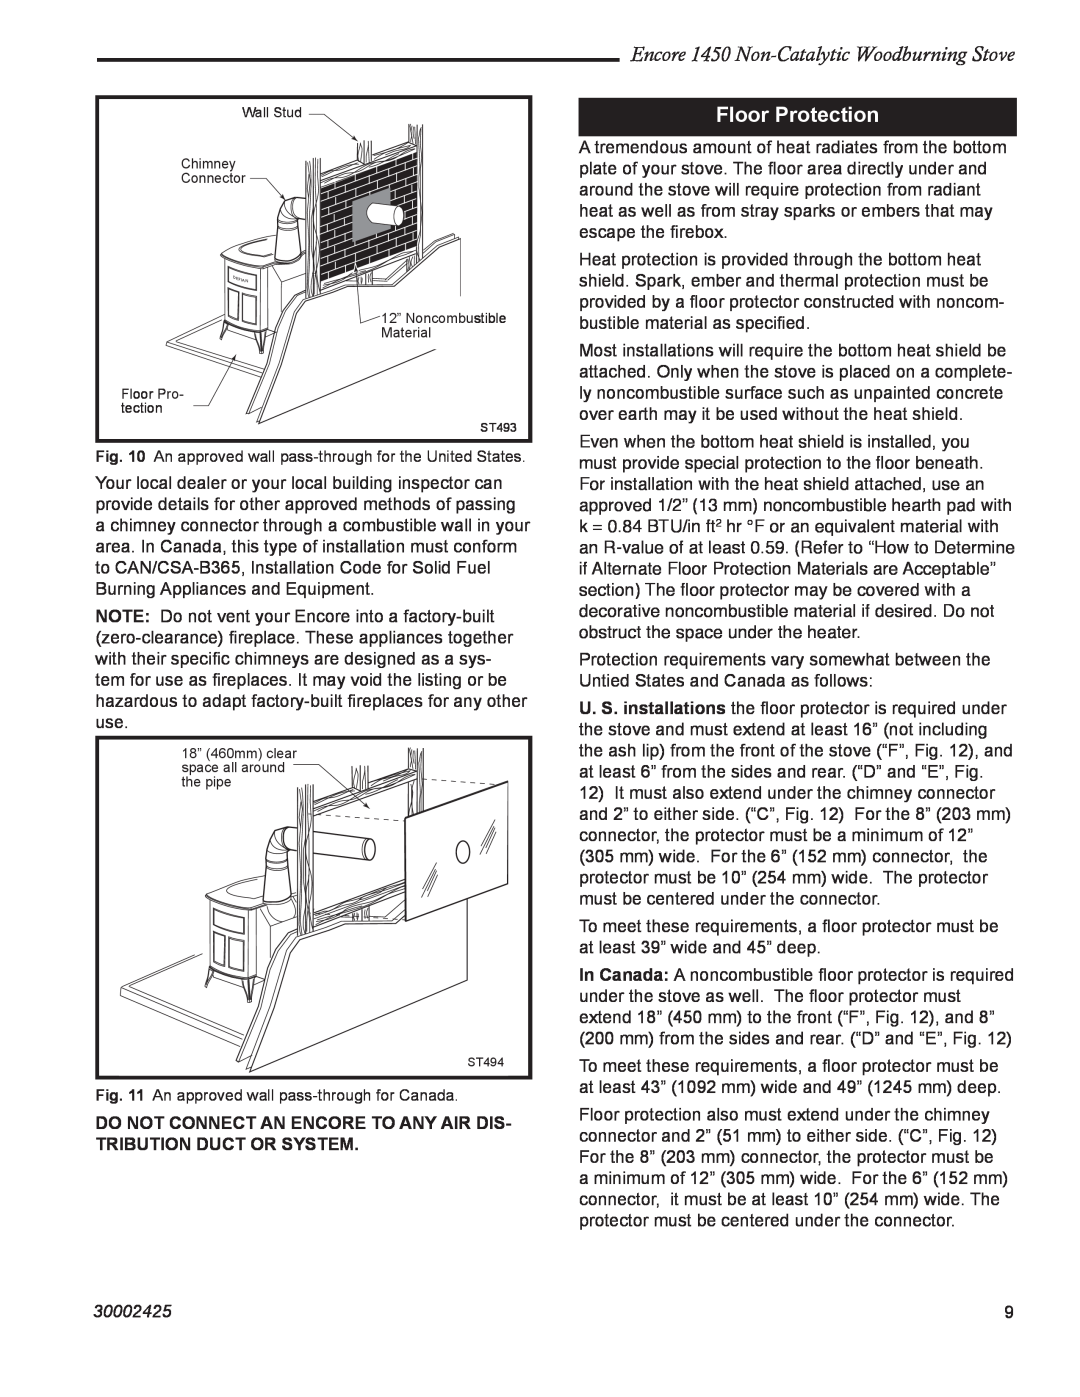 Vermont Casting installation instructions Floor Protection, Encore 1450 Non-CatalyticWoodburning Stove, 30002425 